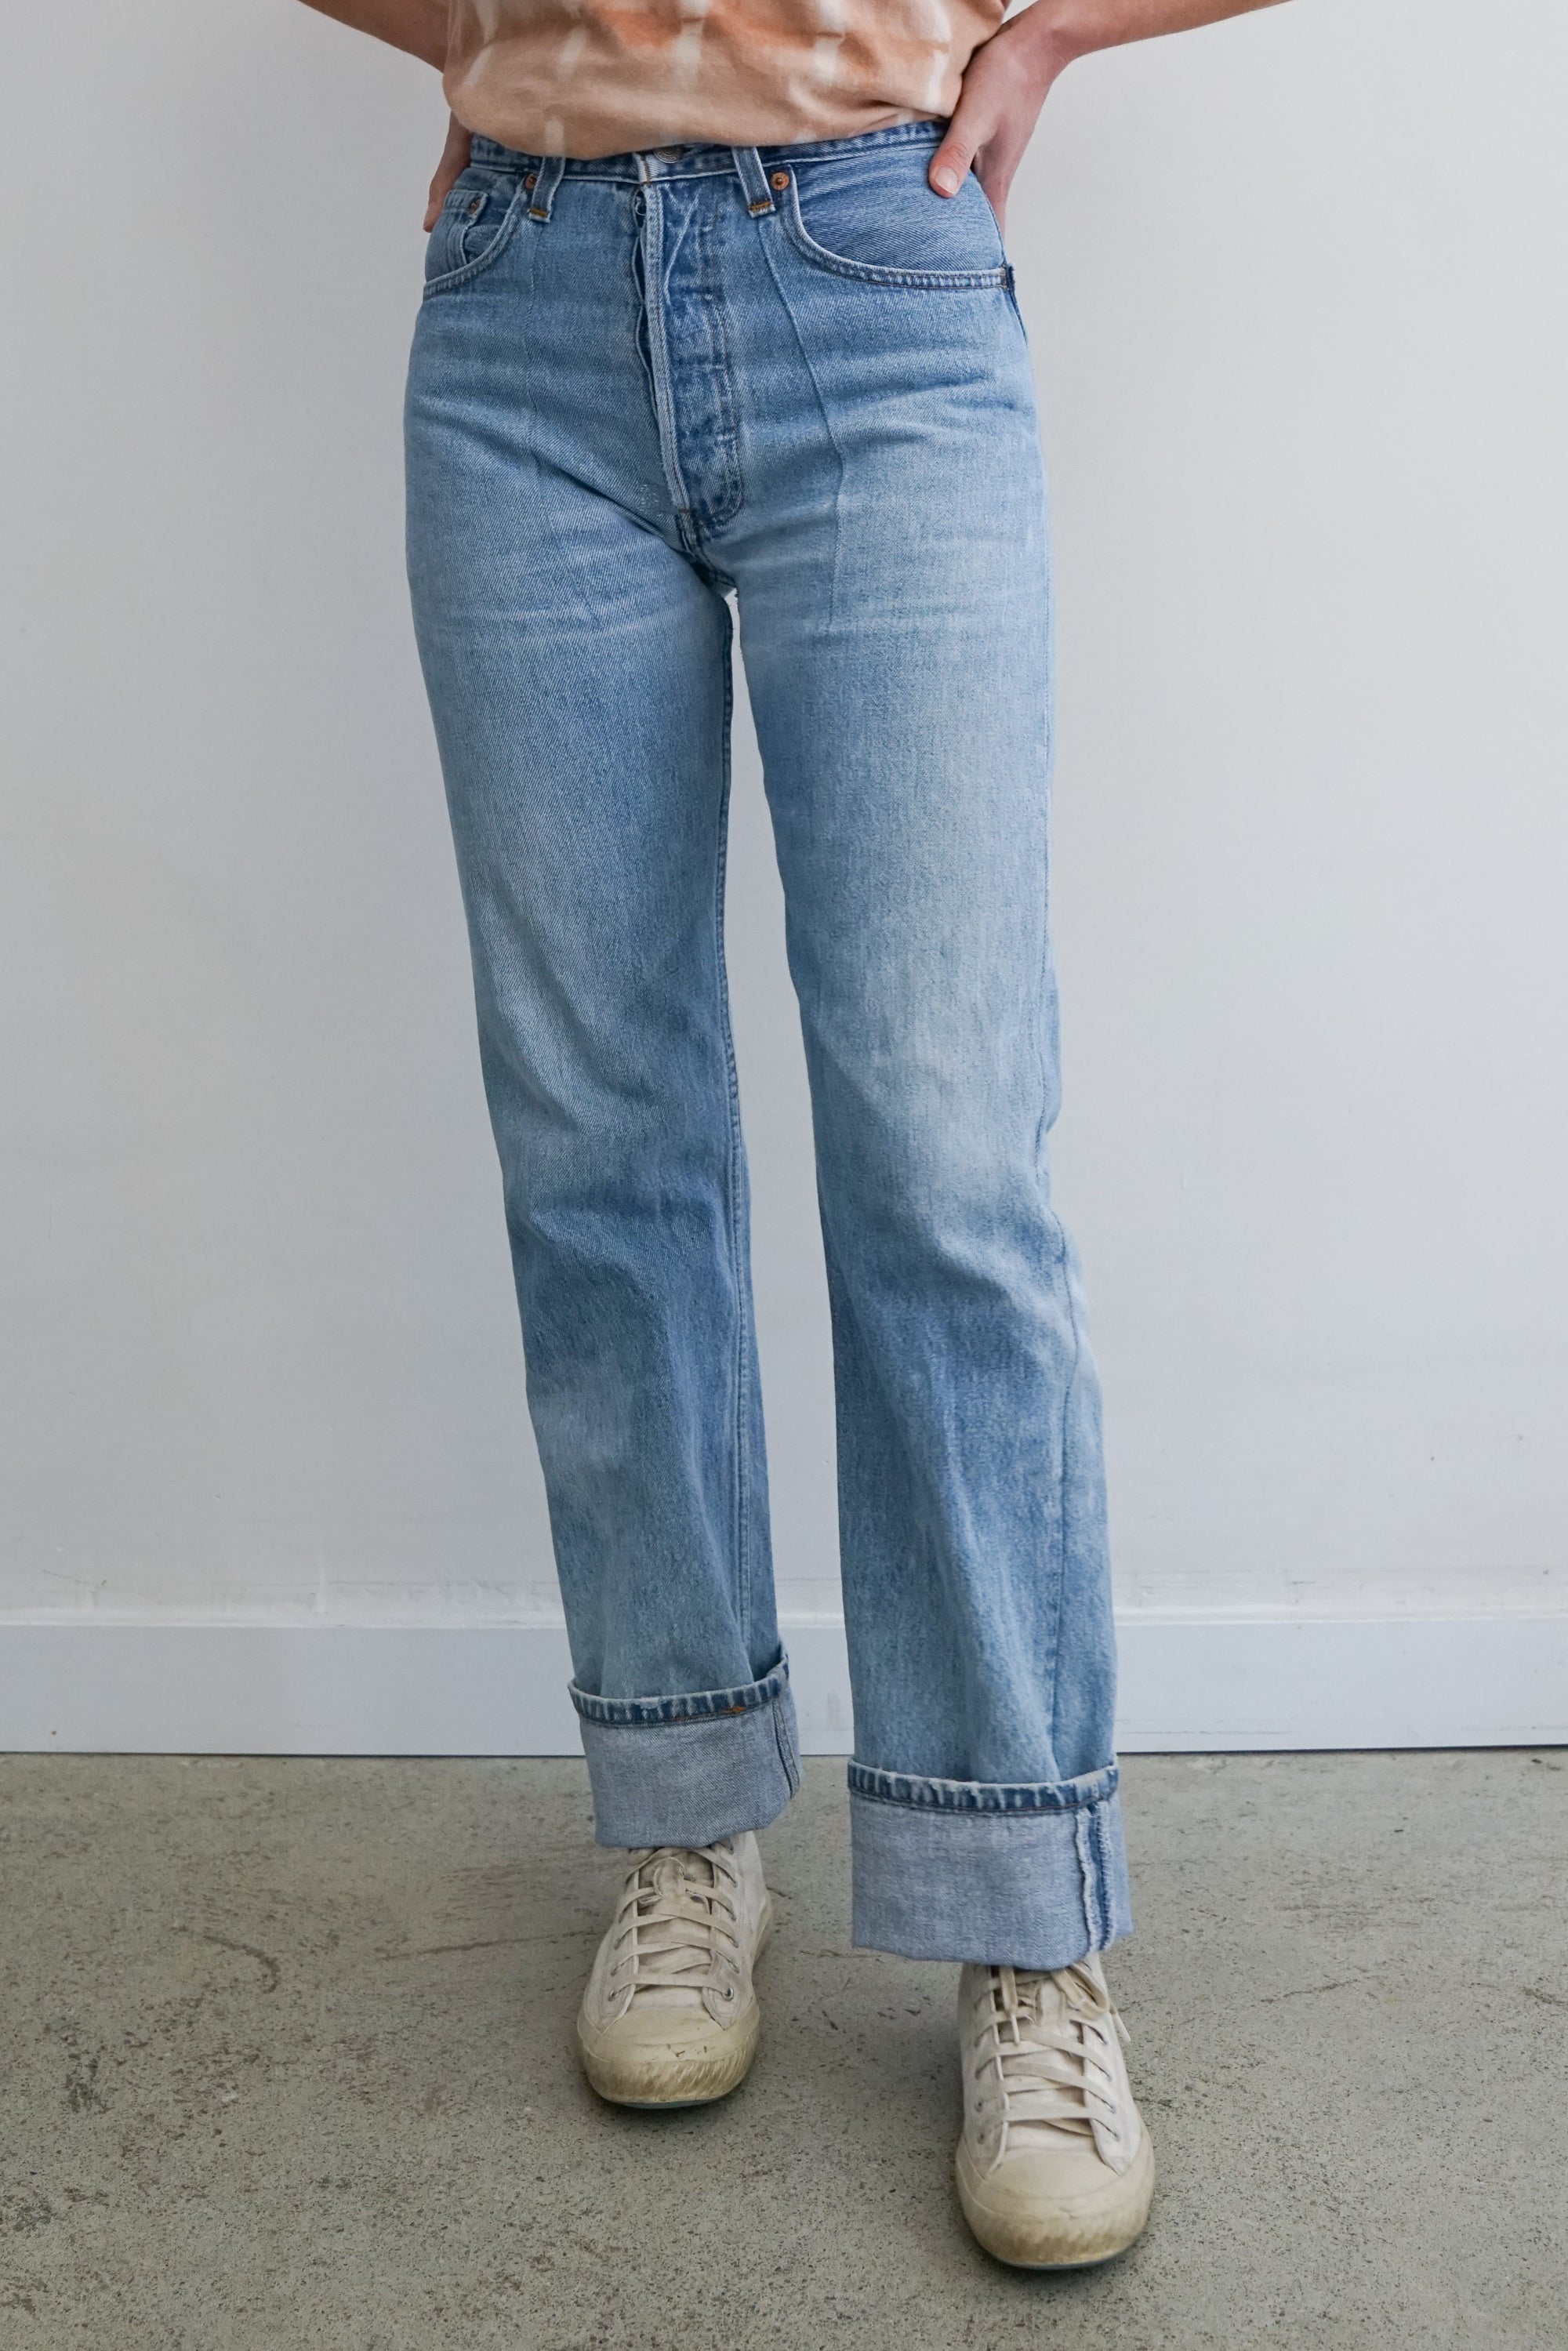 Reworked + Repaired Levis 501 26W